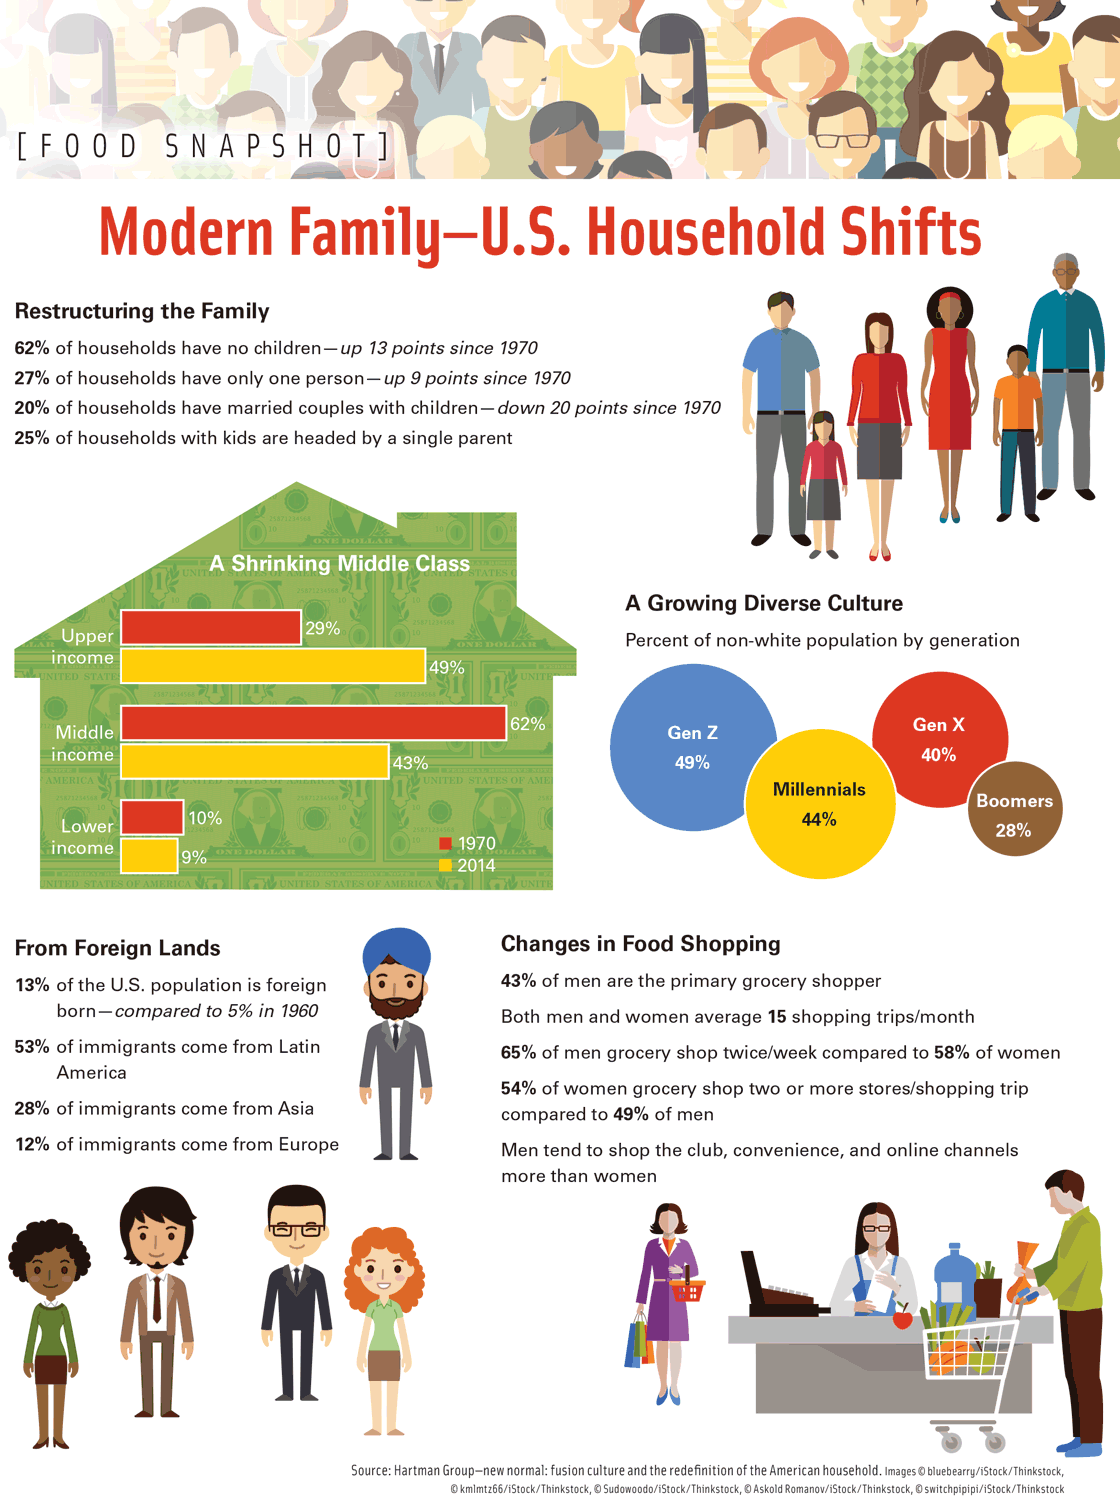 Modern Family—U.S. Household Shifts, Source: Hartman Group—new normal: fusion culture and the redefinition of the American household.